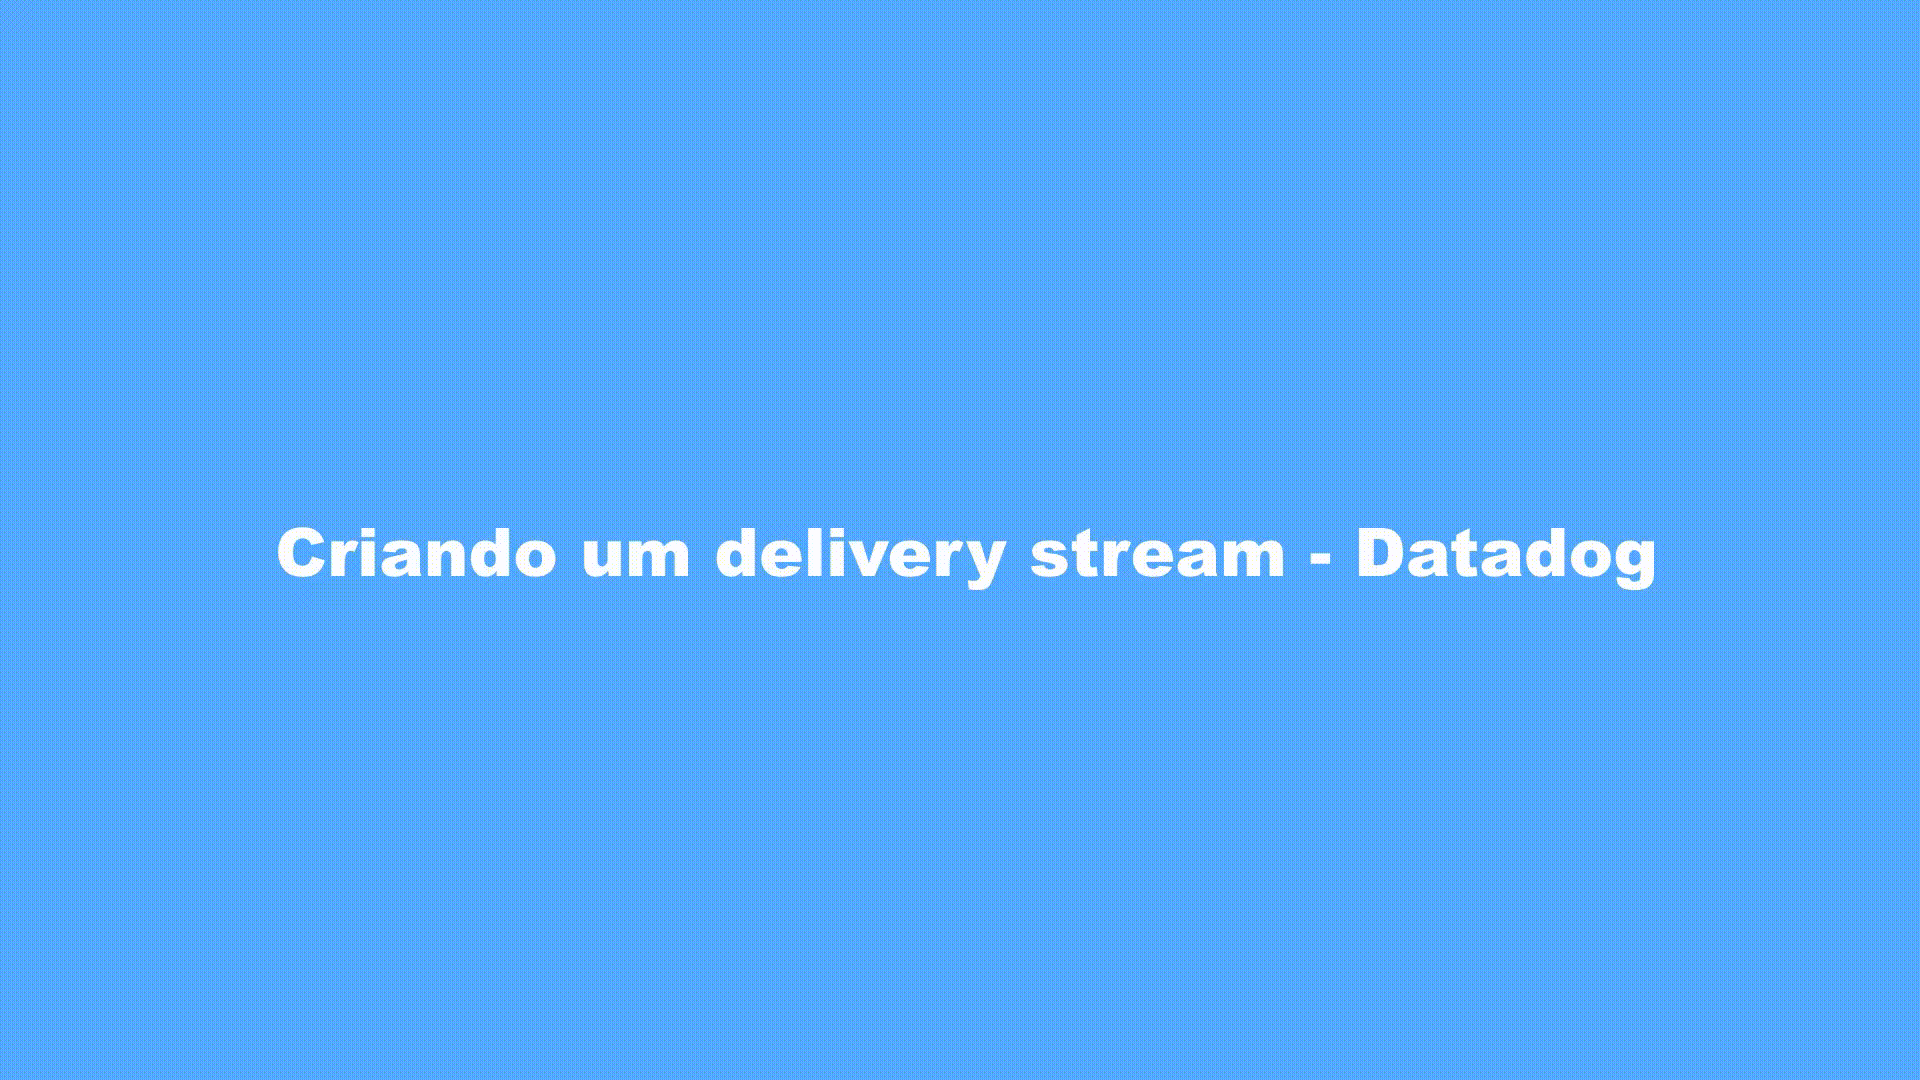 animation showing steps to create data streaming to datadog